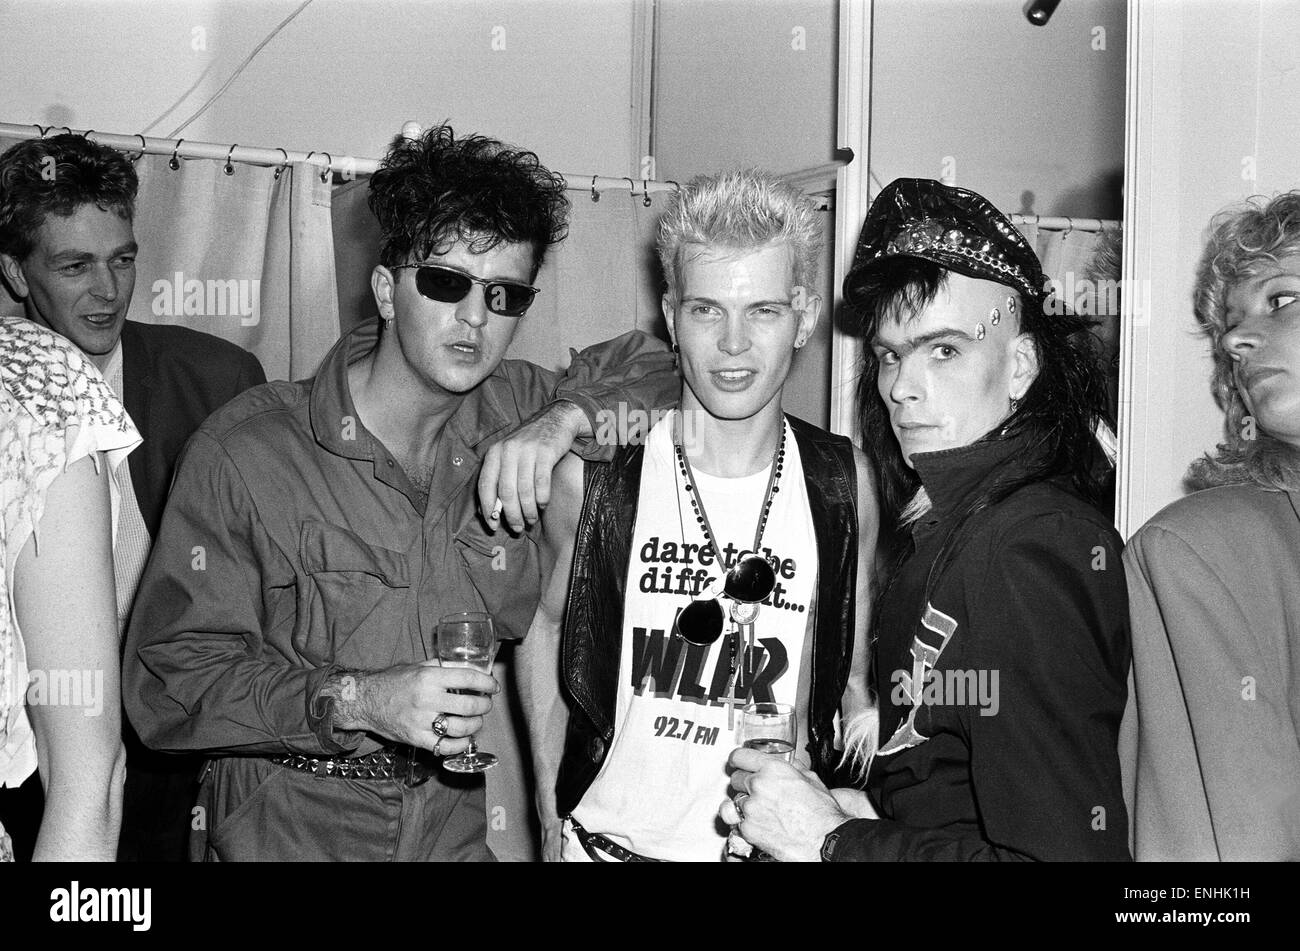 Ace fashion shop, King's Road, Chelsea holds a party for it's show biz clients. Steve Strange, Billy Idol and Paul Tok. 25th September 1982. Stock Photo